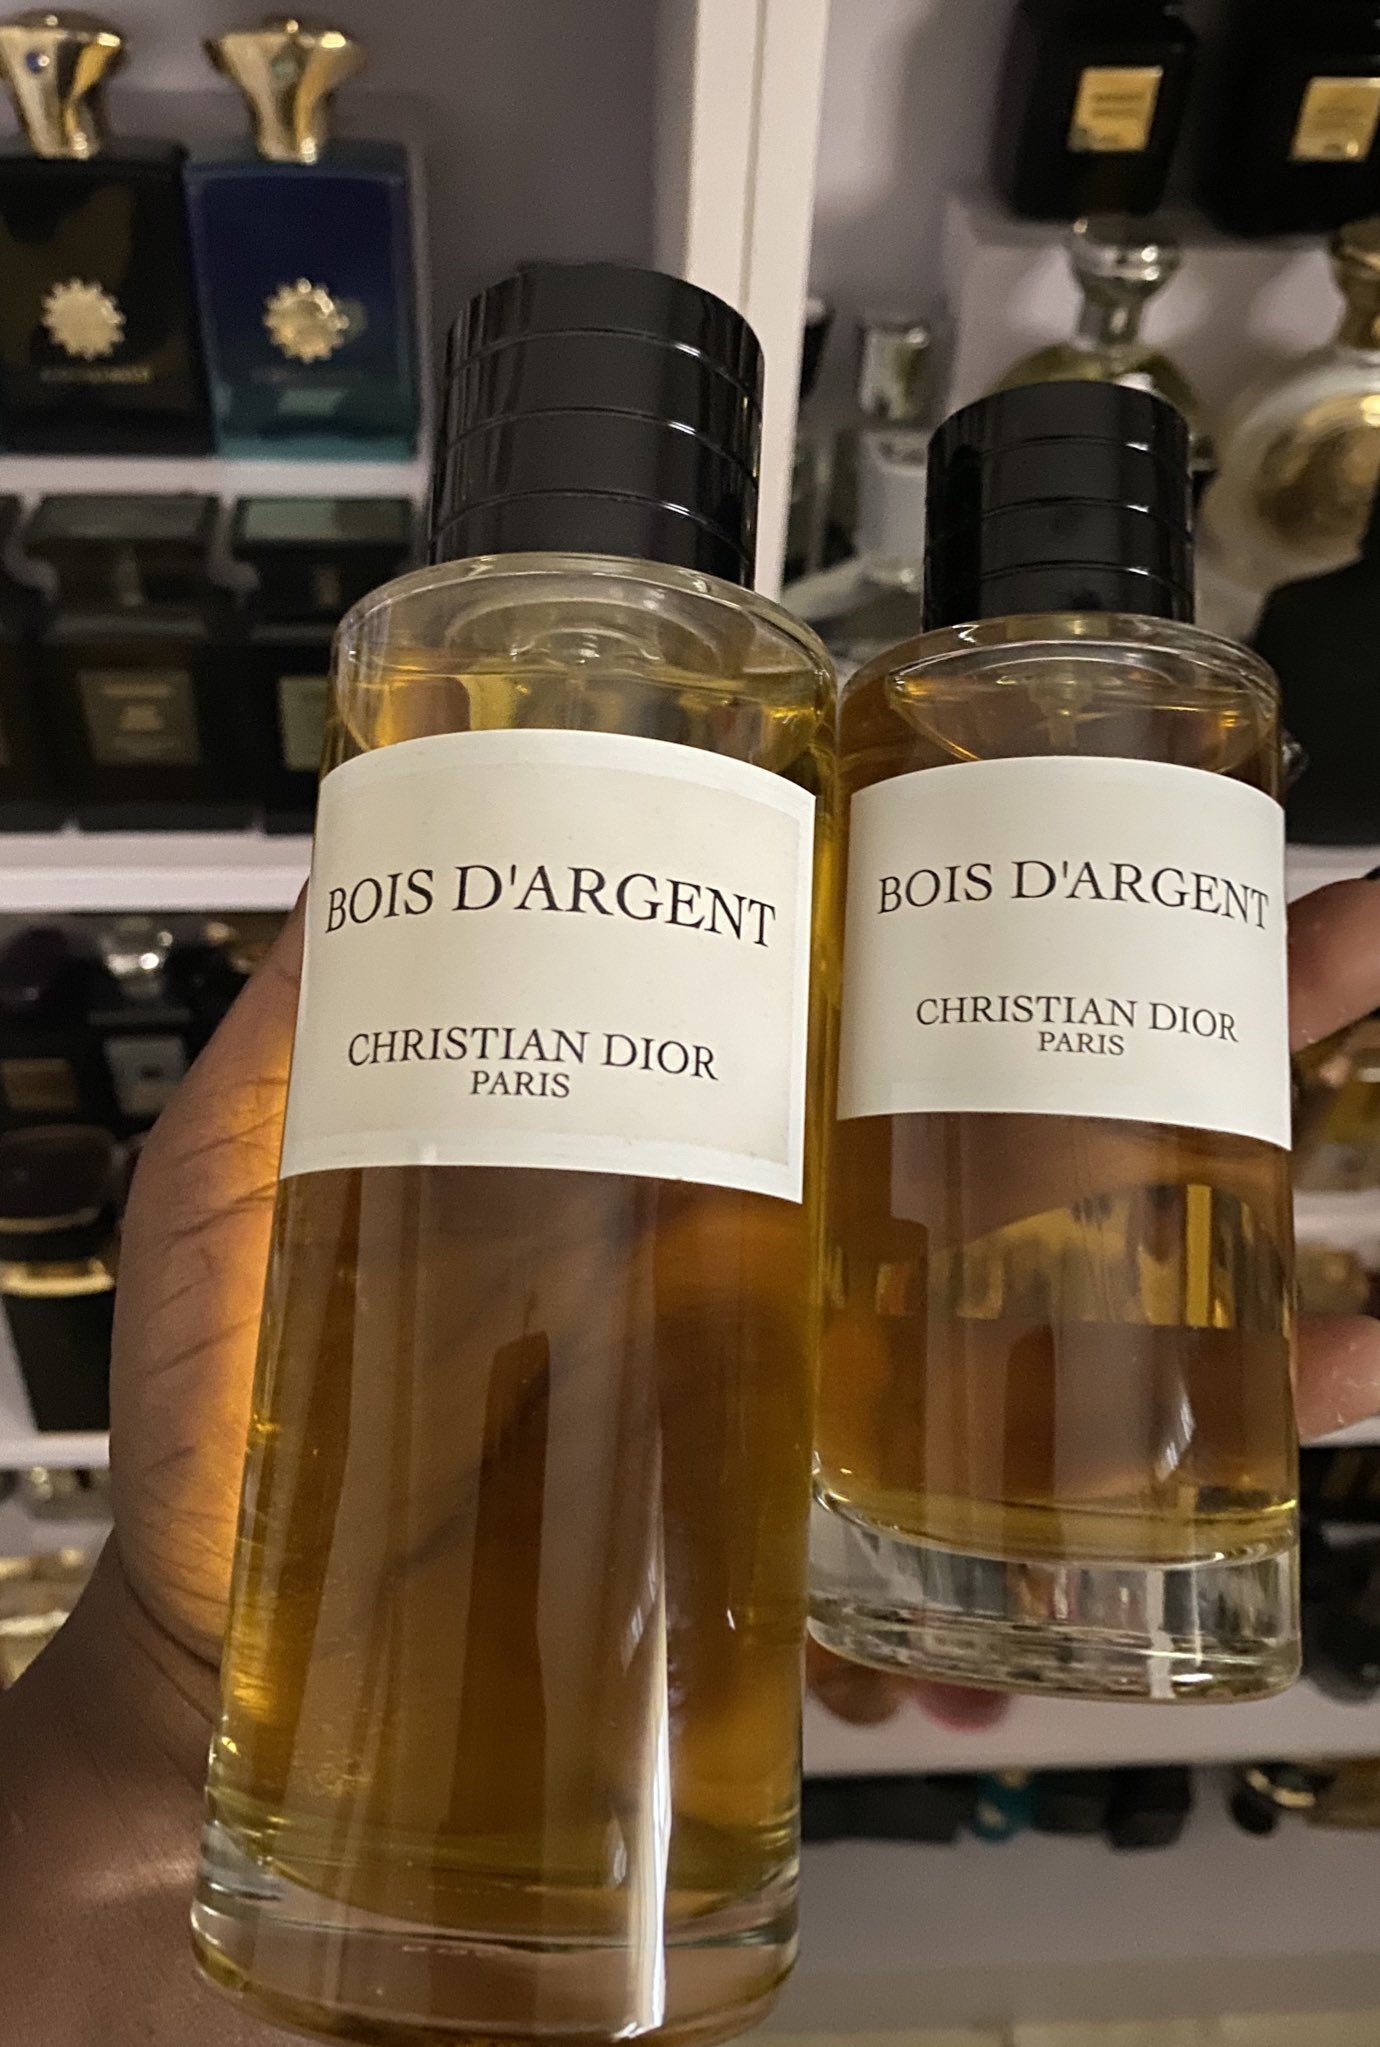 Accountant analyse Maestro Emerald_Signature on Twitter: "Christian Dior Bois D'Argent 250ml boxed  350k, unboxed 230k (save 120k) 125ml boxed 230k, unboxed 130k (save 100k)  Authentic unboxed perfumes 🔥 https://t.co/mgSkjc1T2R" / Twitter